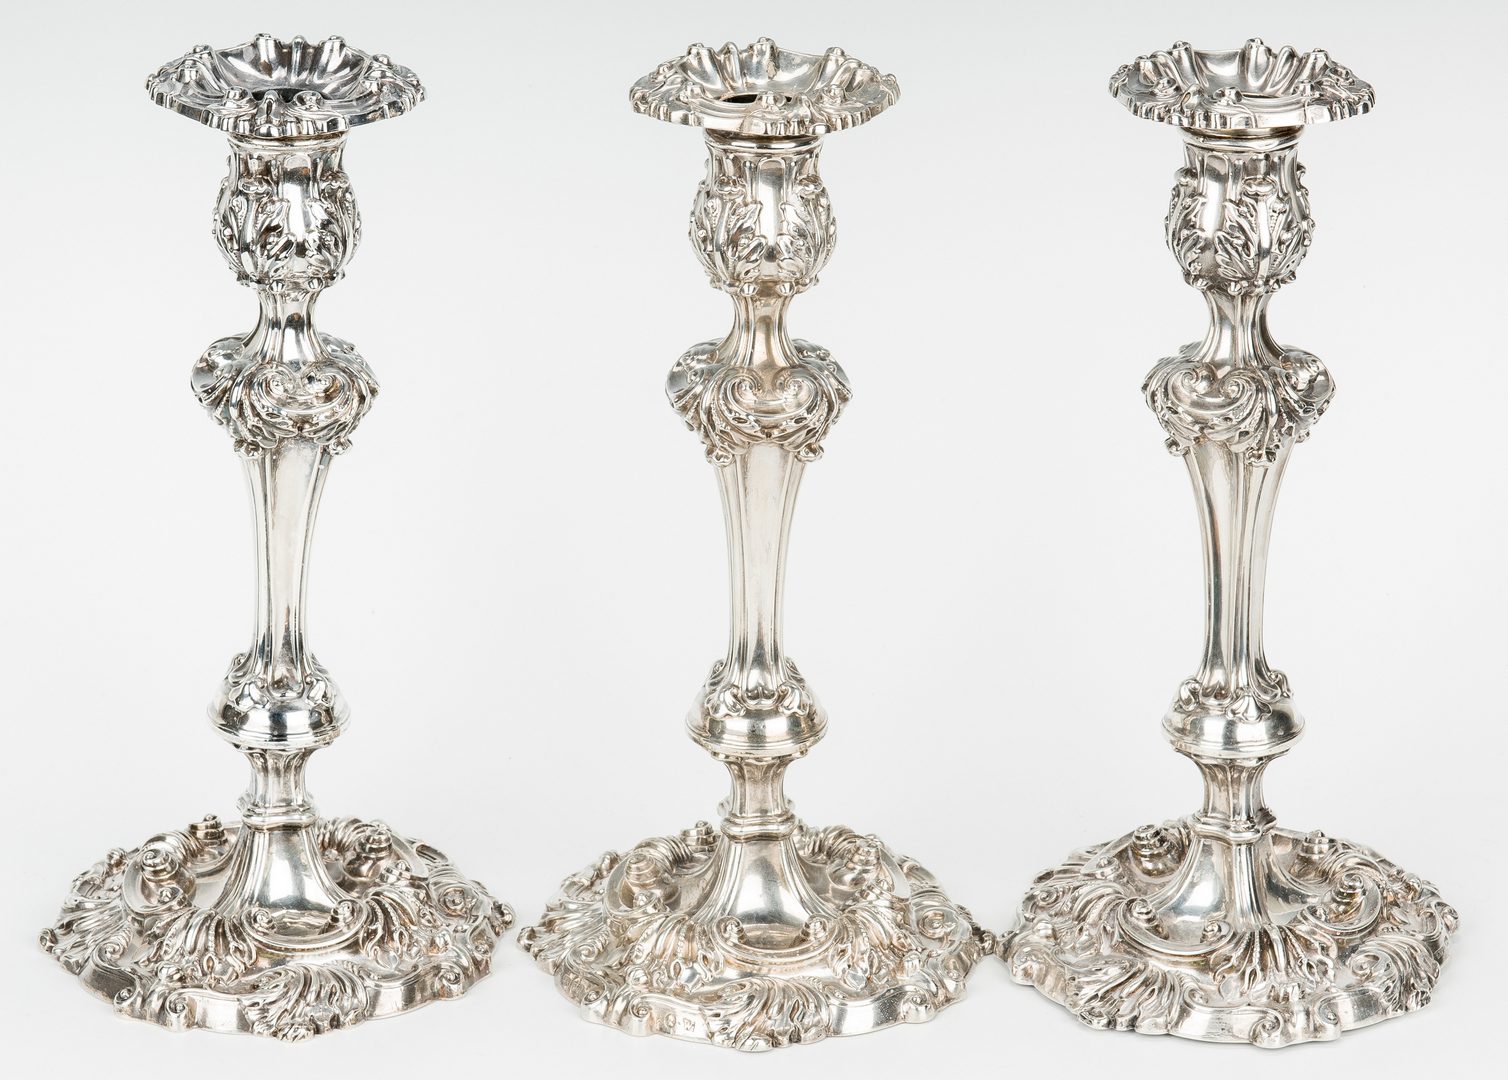 Lot 68: 3 English Sterling Silver Candlesticks